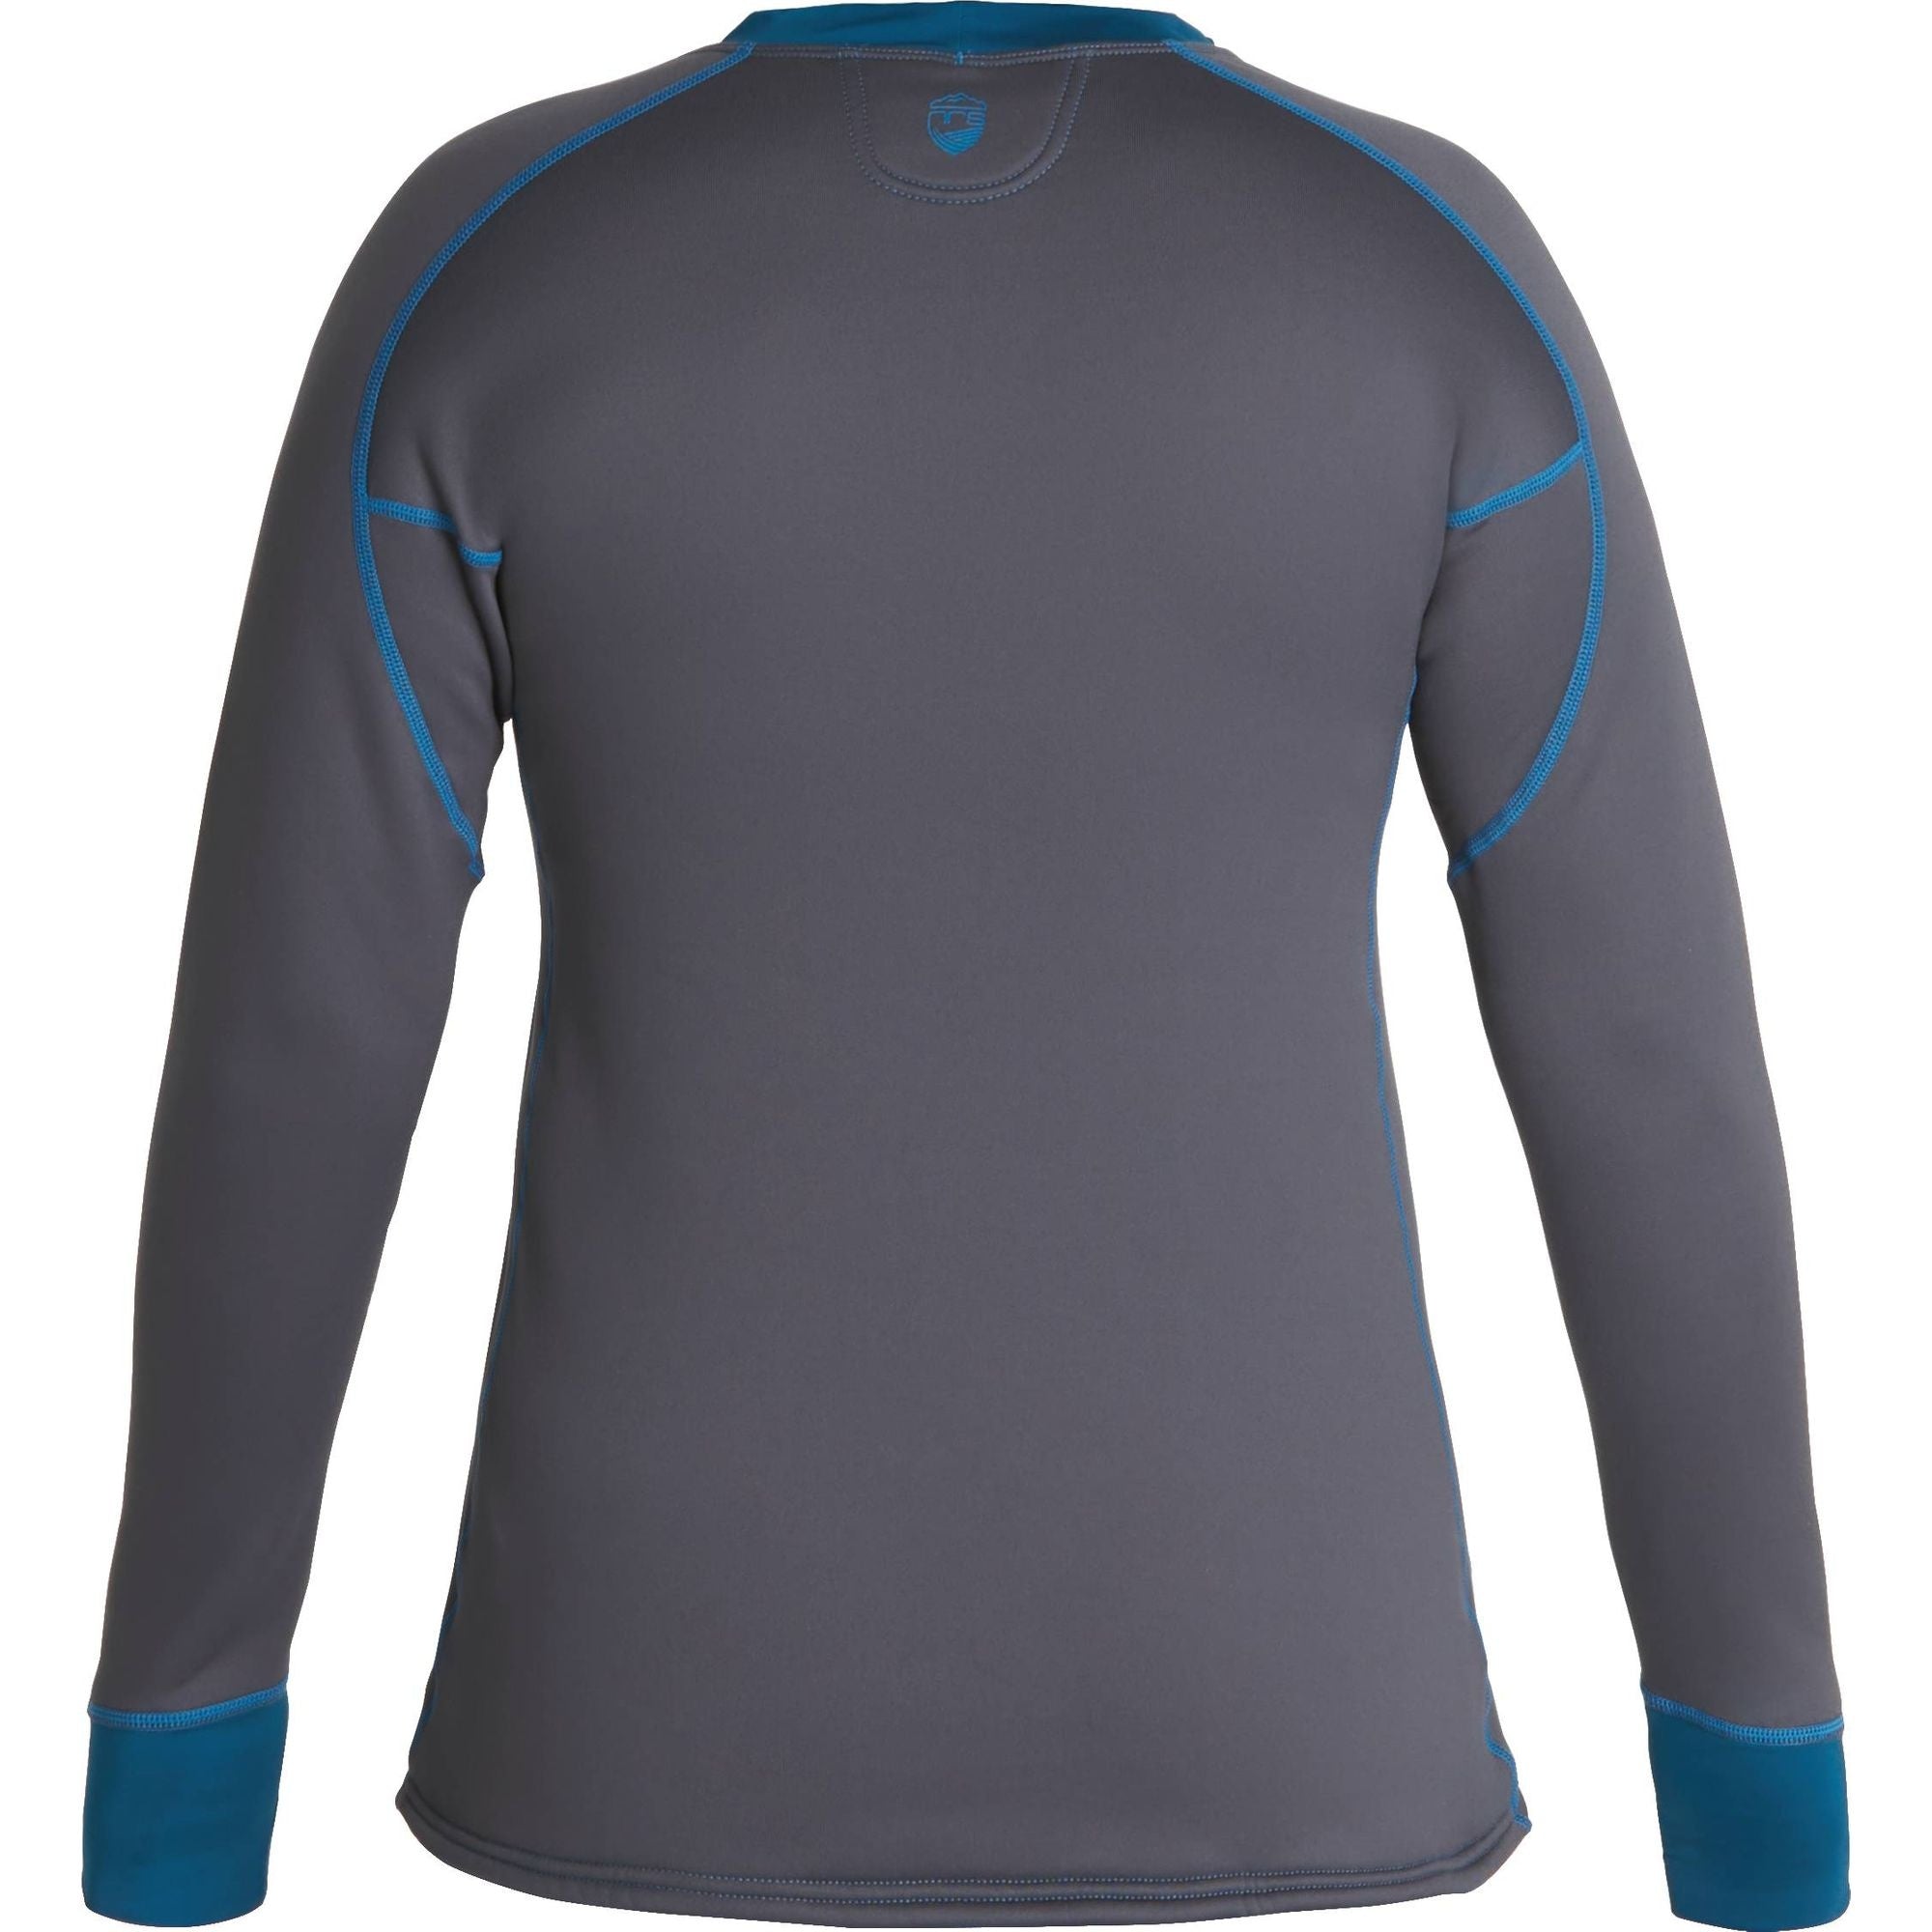 NRS - Women's Expedition Weight Shirt